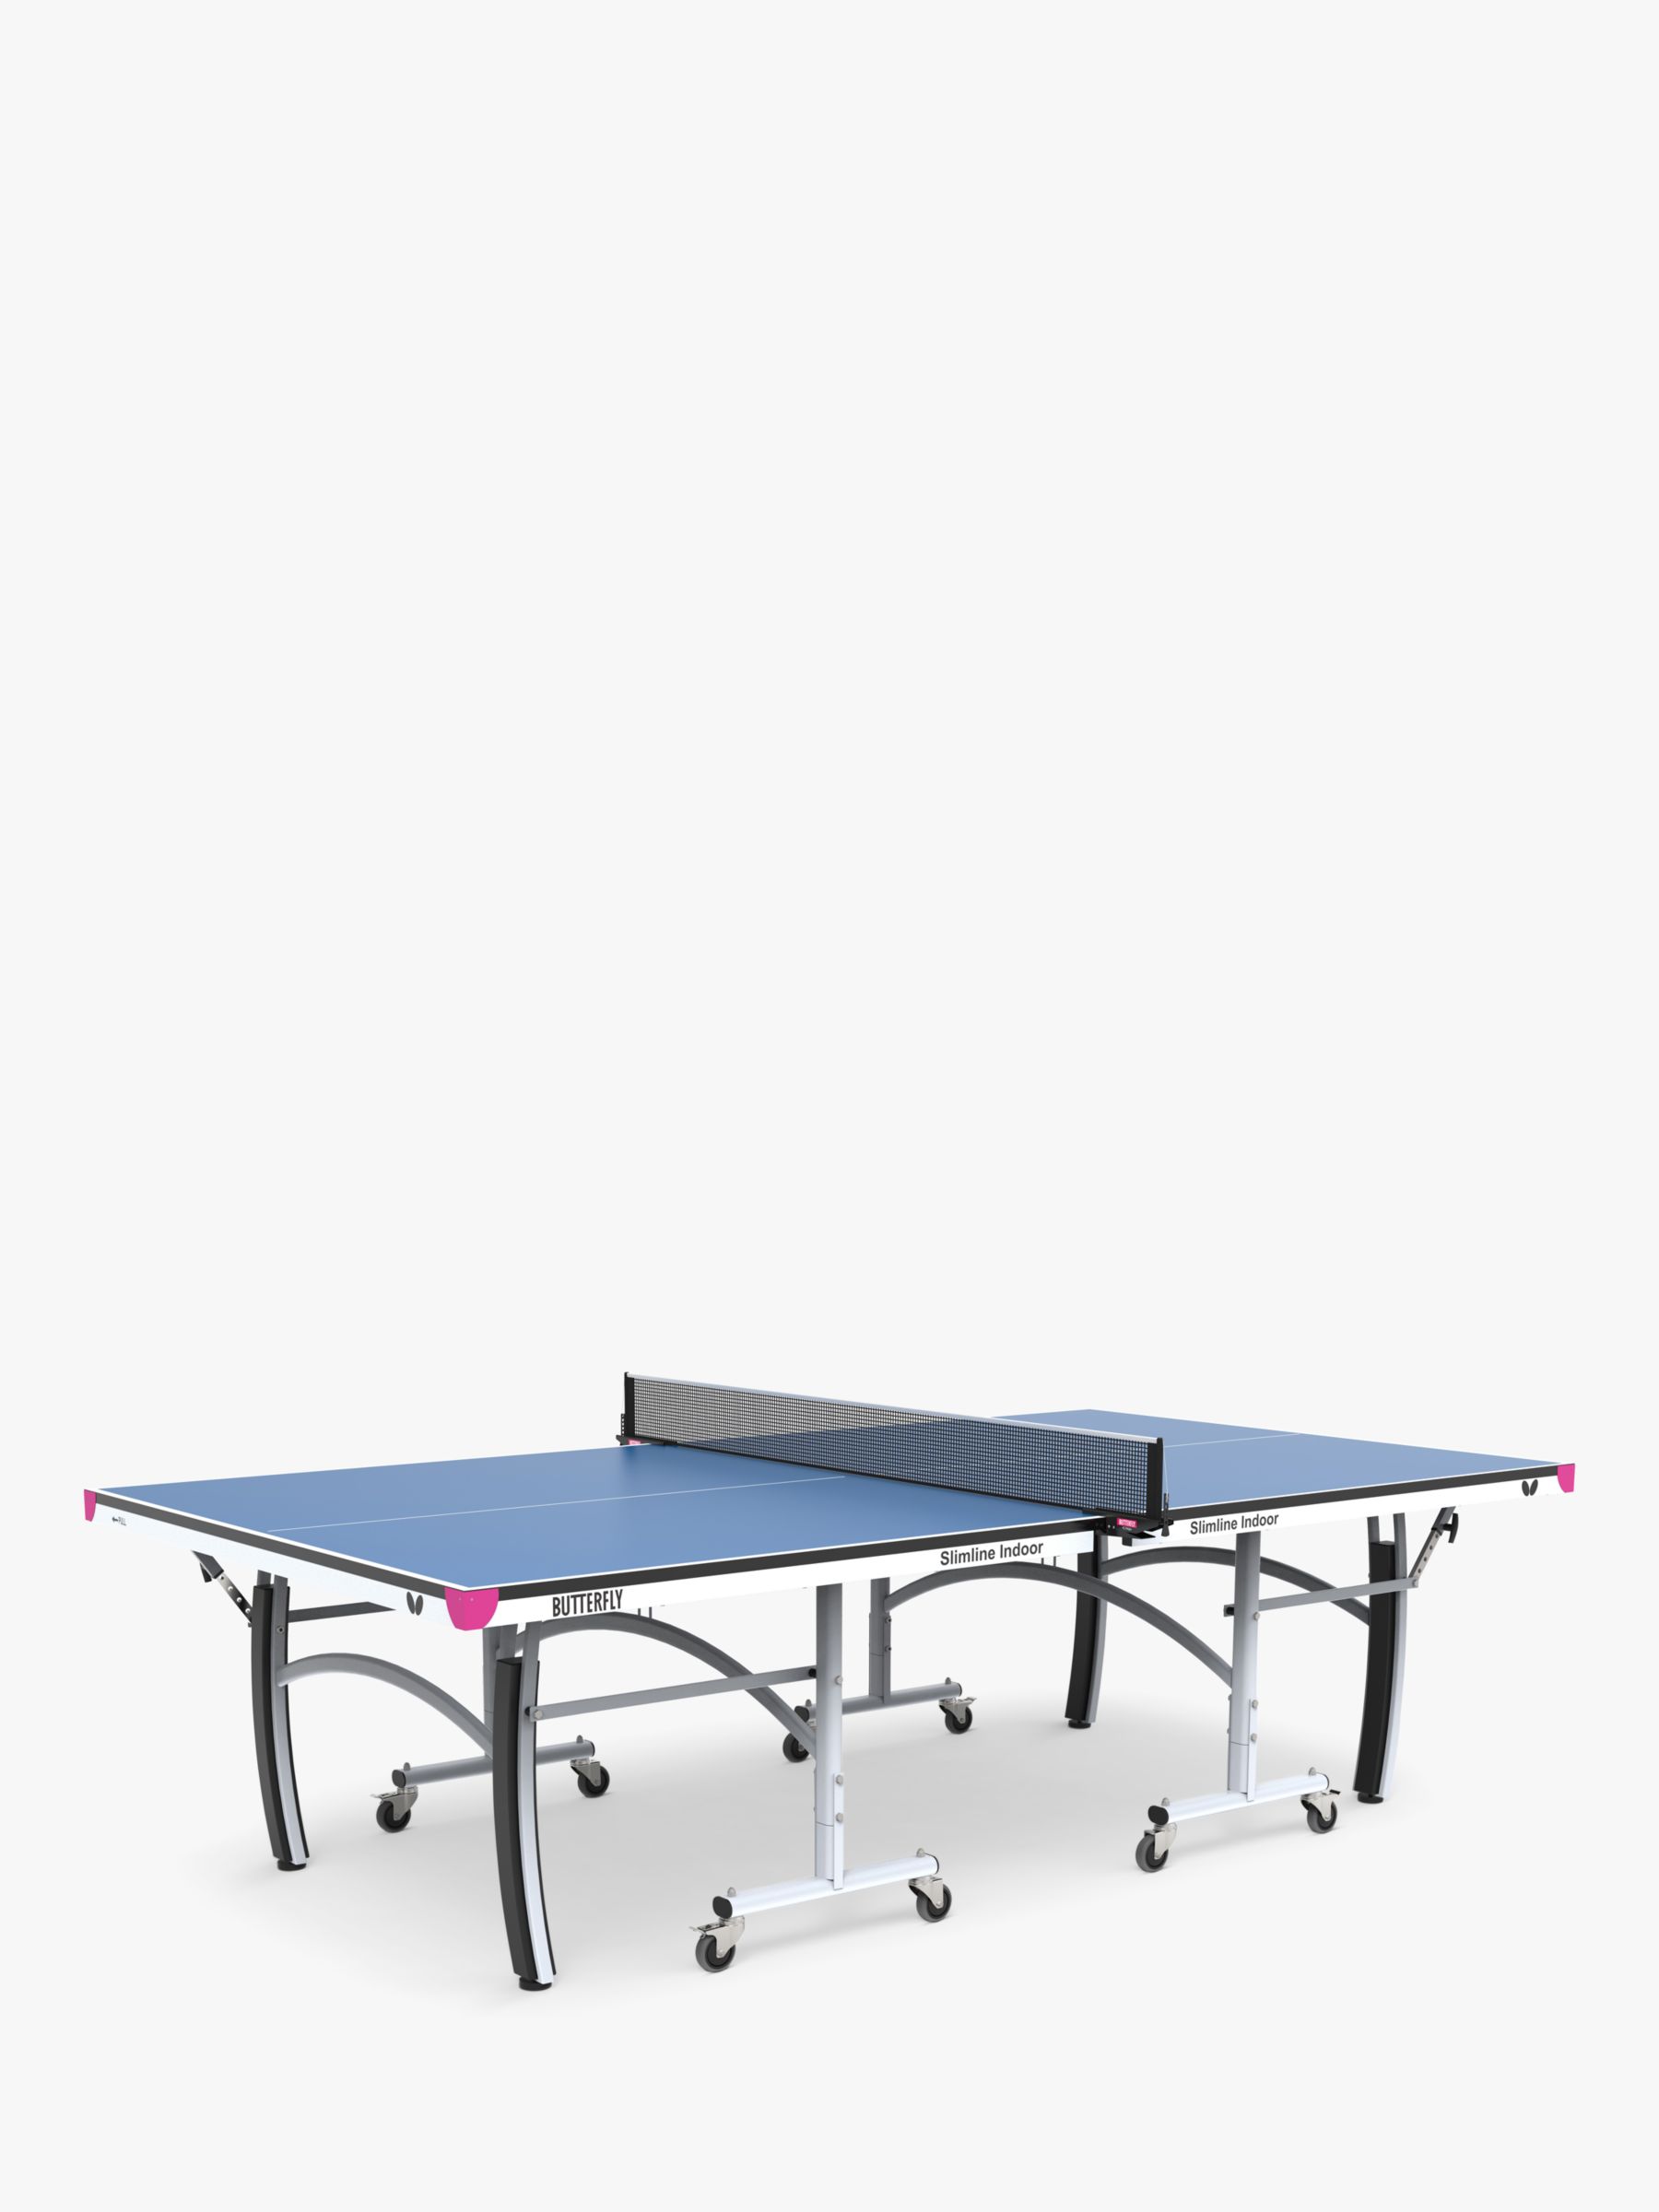 Les dimensions d'une table de ping-pong - Chill out with Toulet